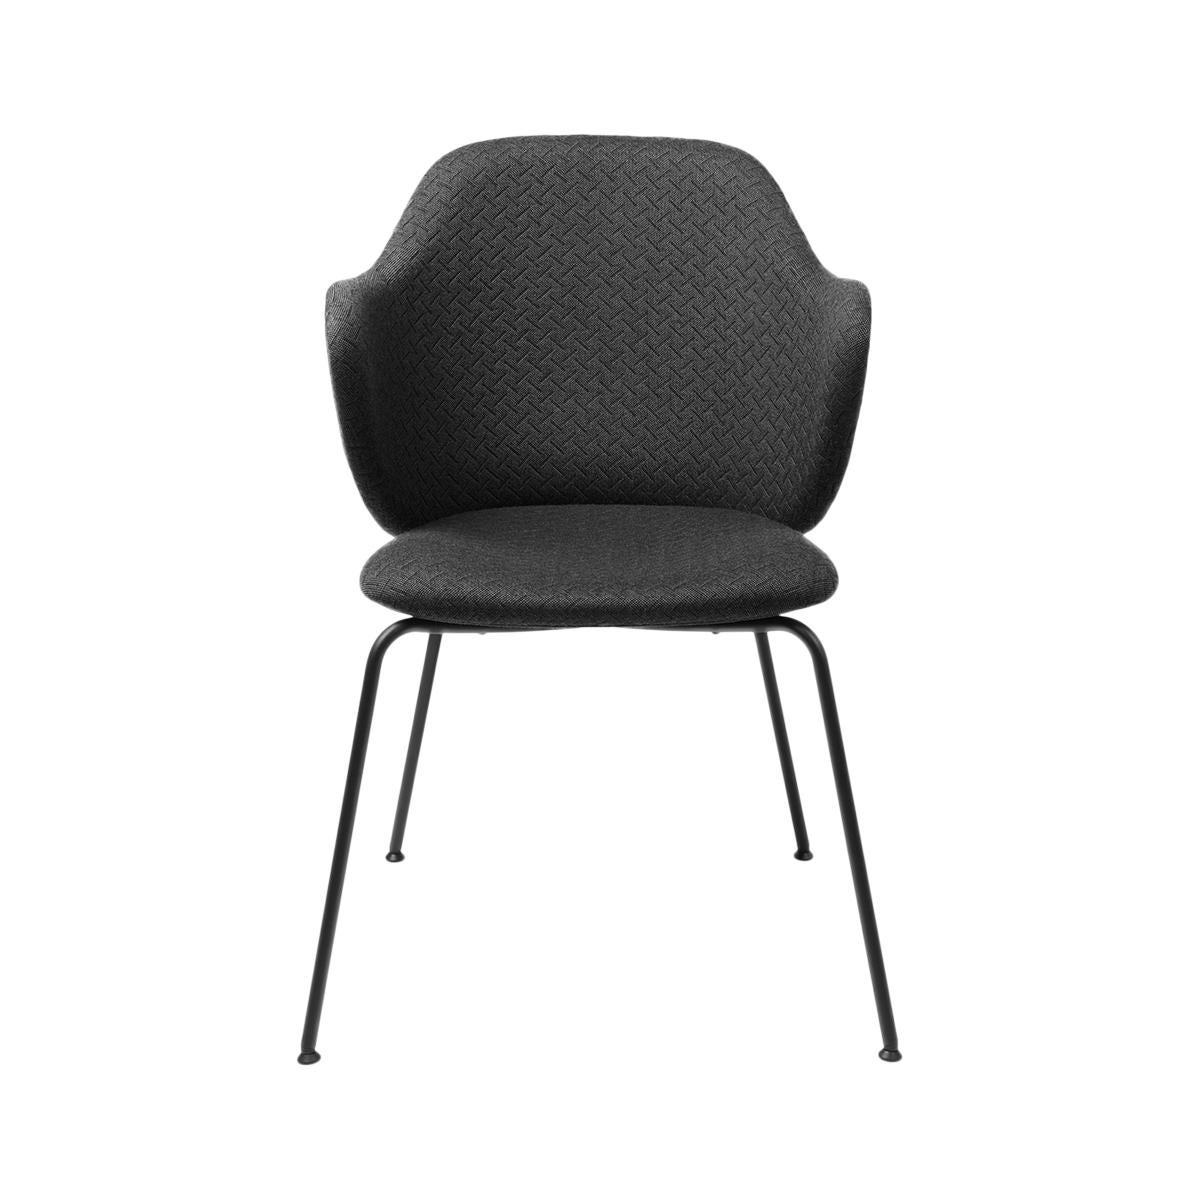 Dark grey jupiter Lassen chair by Lassen
Dimensions: W 58 x D 60 x H 88 cm 
Materials: Textile

The Lassen chair by Flemming Lassen, Magnus Sangild and Marianne Viktor was launched in 2018 as an ode to Flemming Lassen’s uncompromising approach